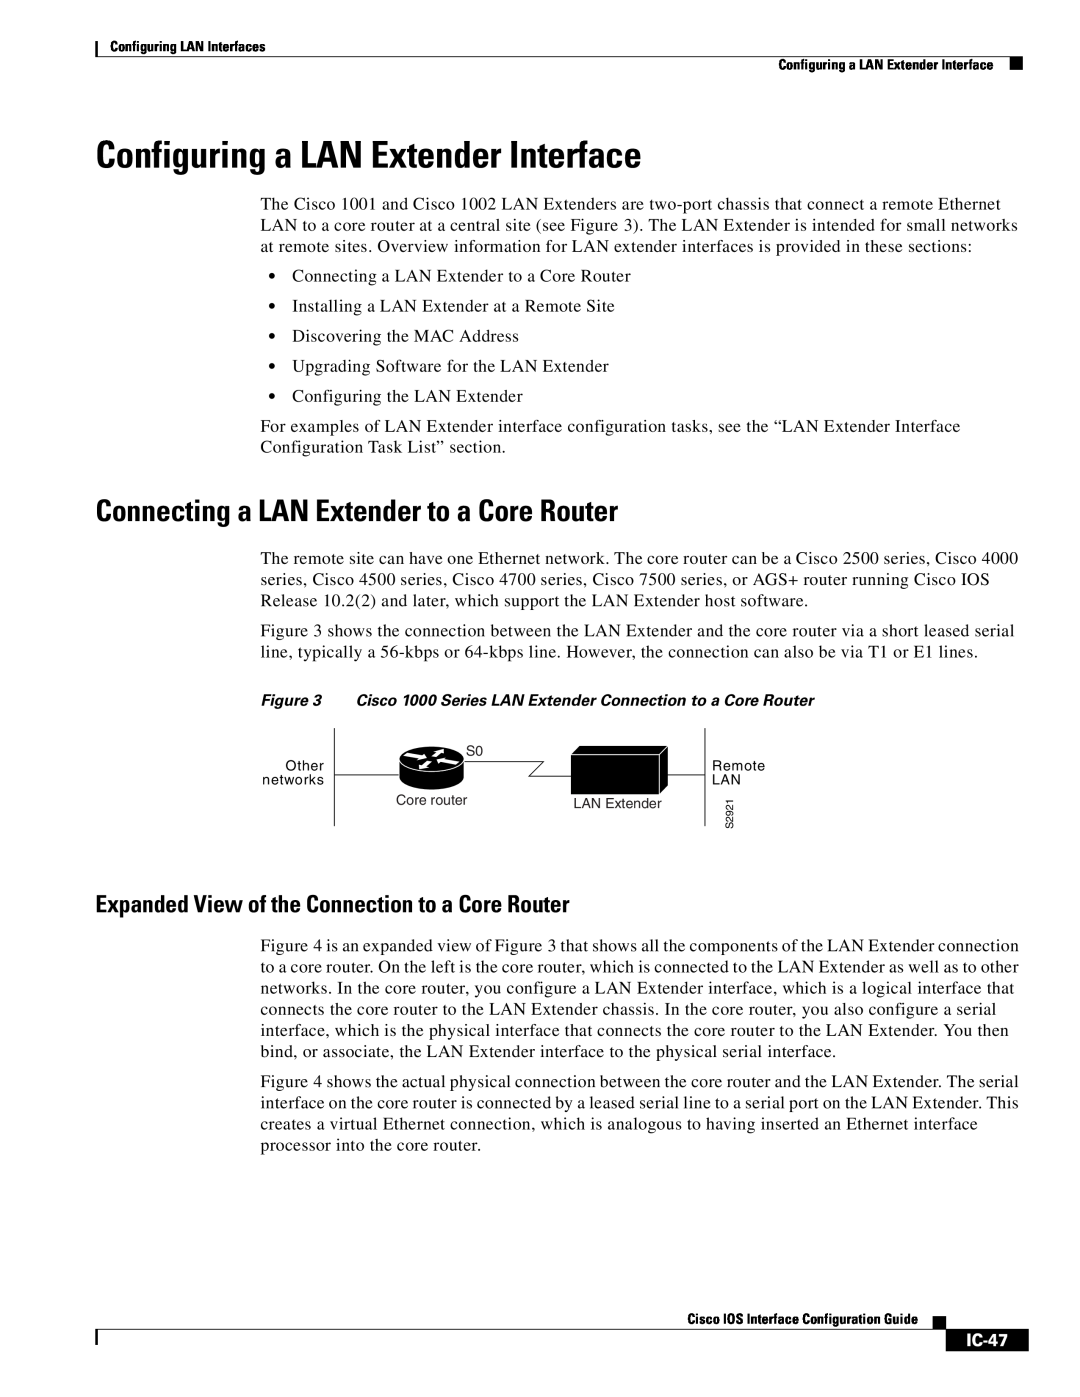 Cisco Systems IC-23 manual Configuring a LAN Extender Interface, Connecting a LAN Extender to a Core Router, IC-47 